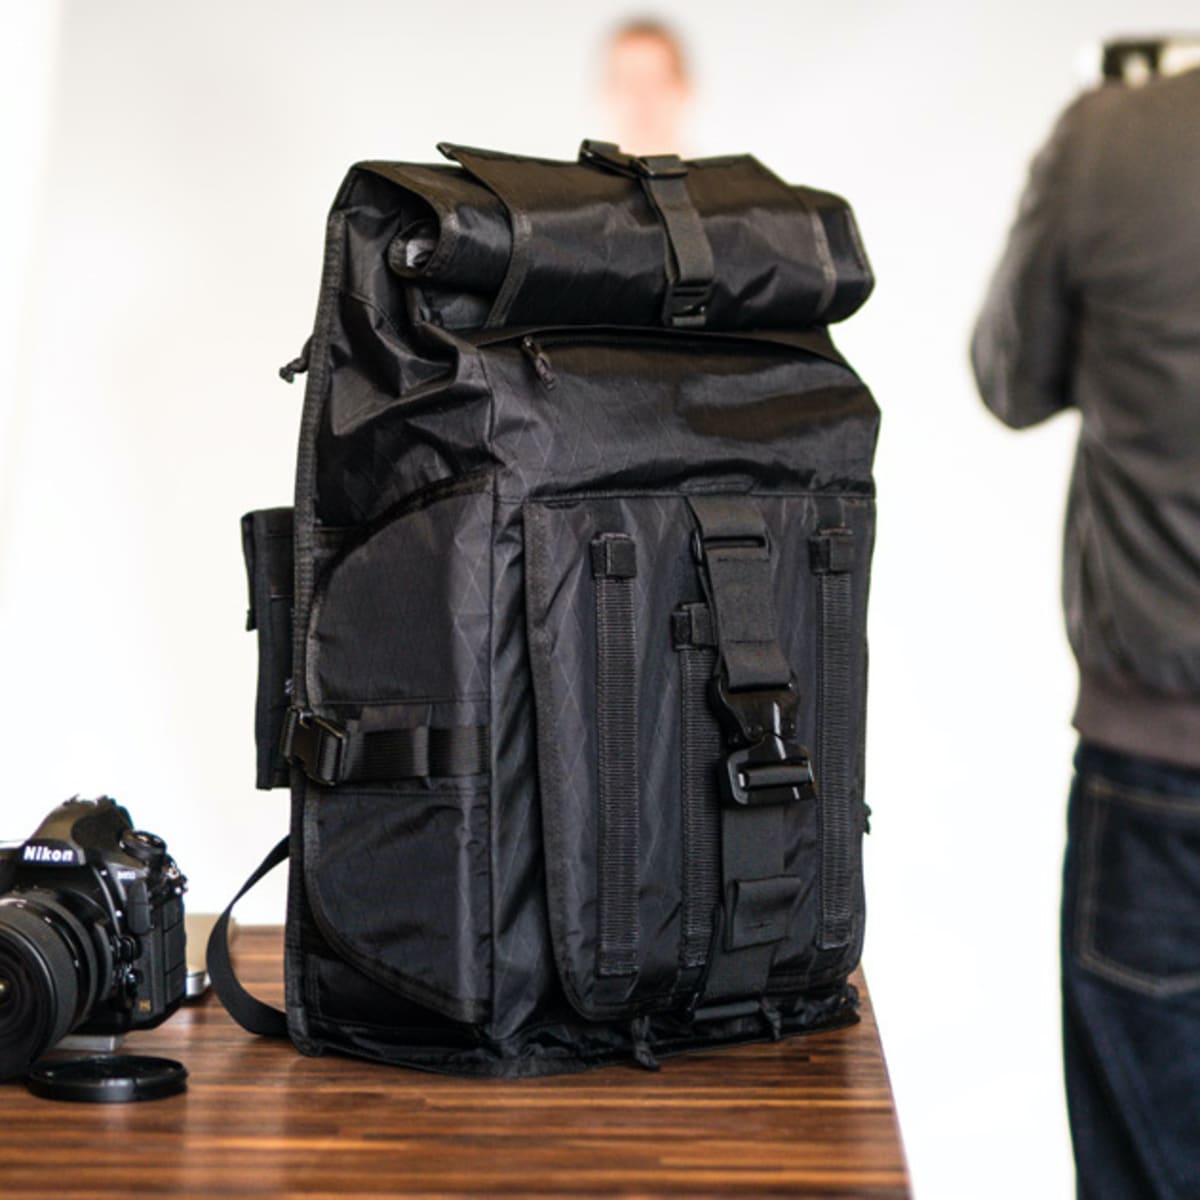 Mission Workshop S Integer Camera Pack Gets Upgraded To Their Series Acquire